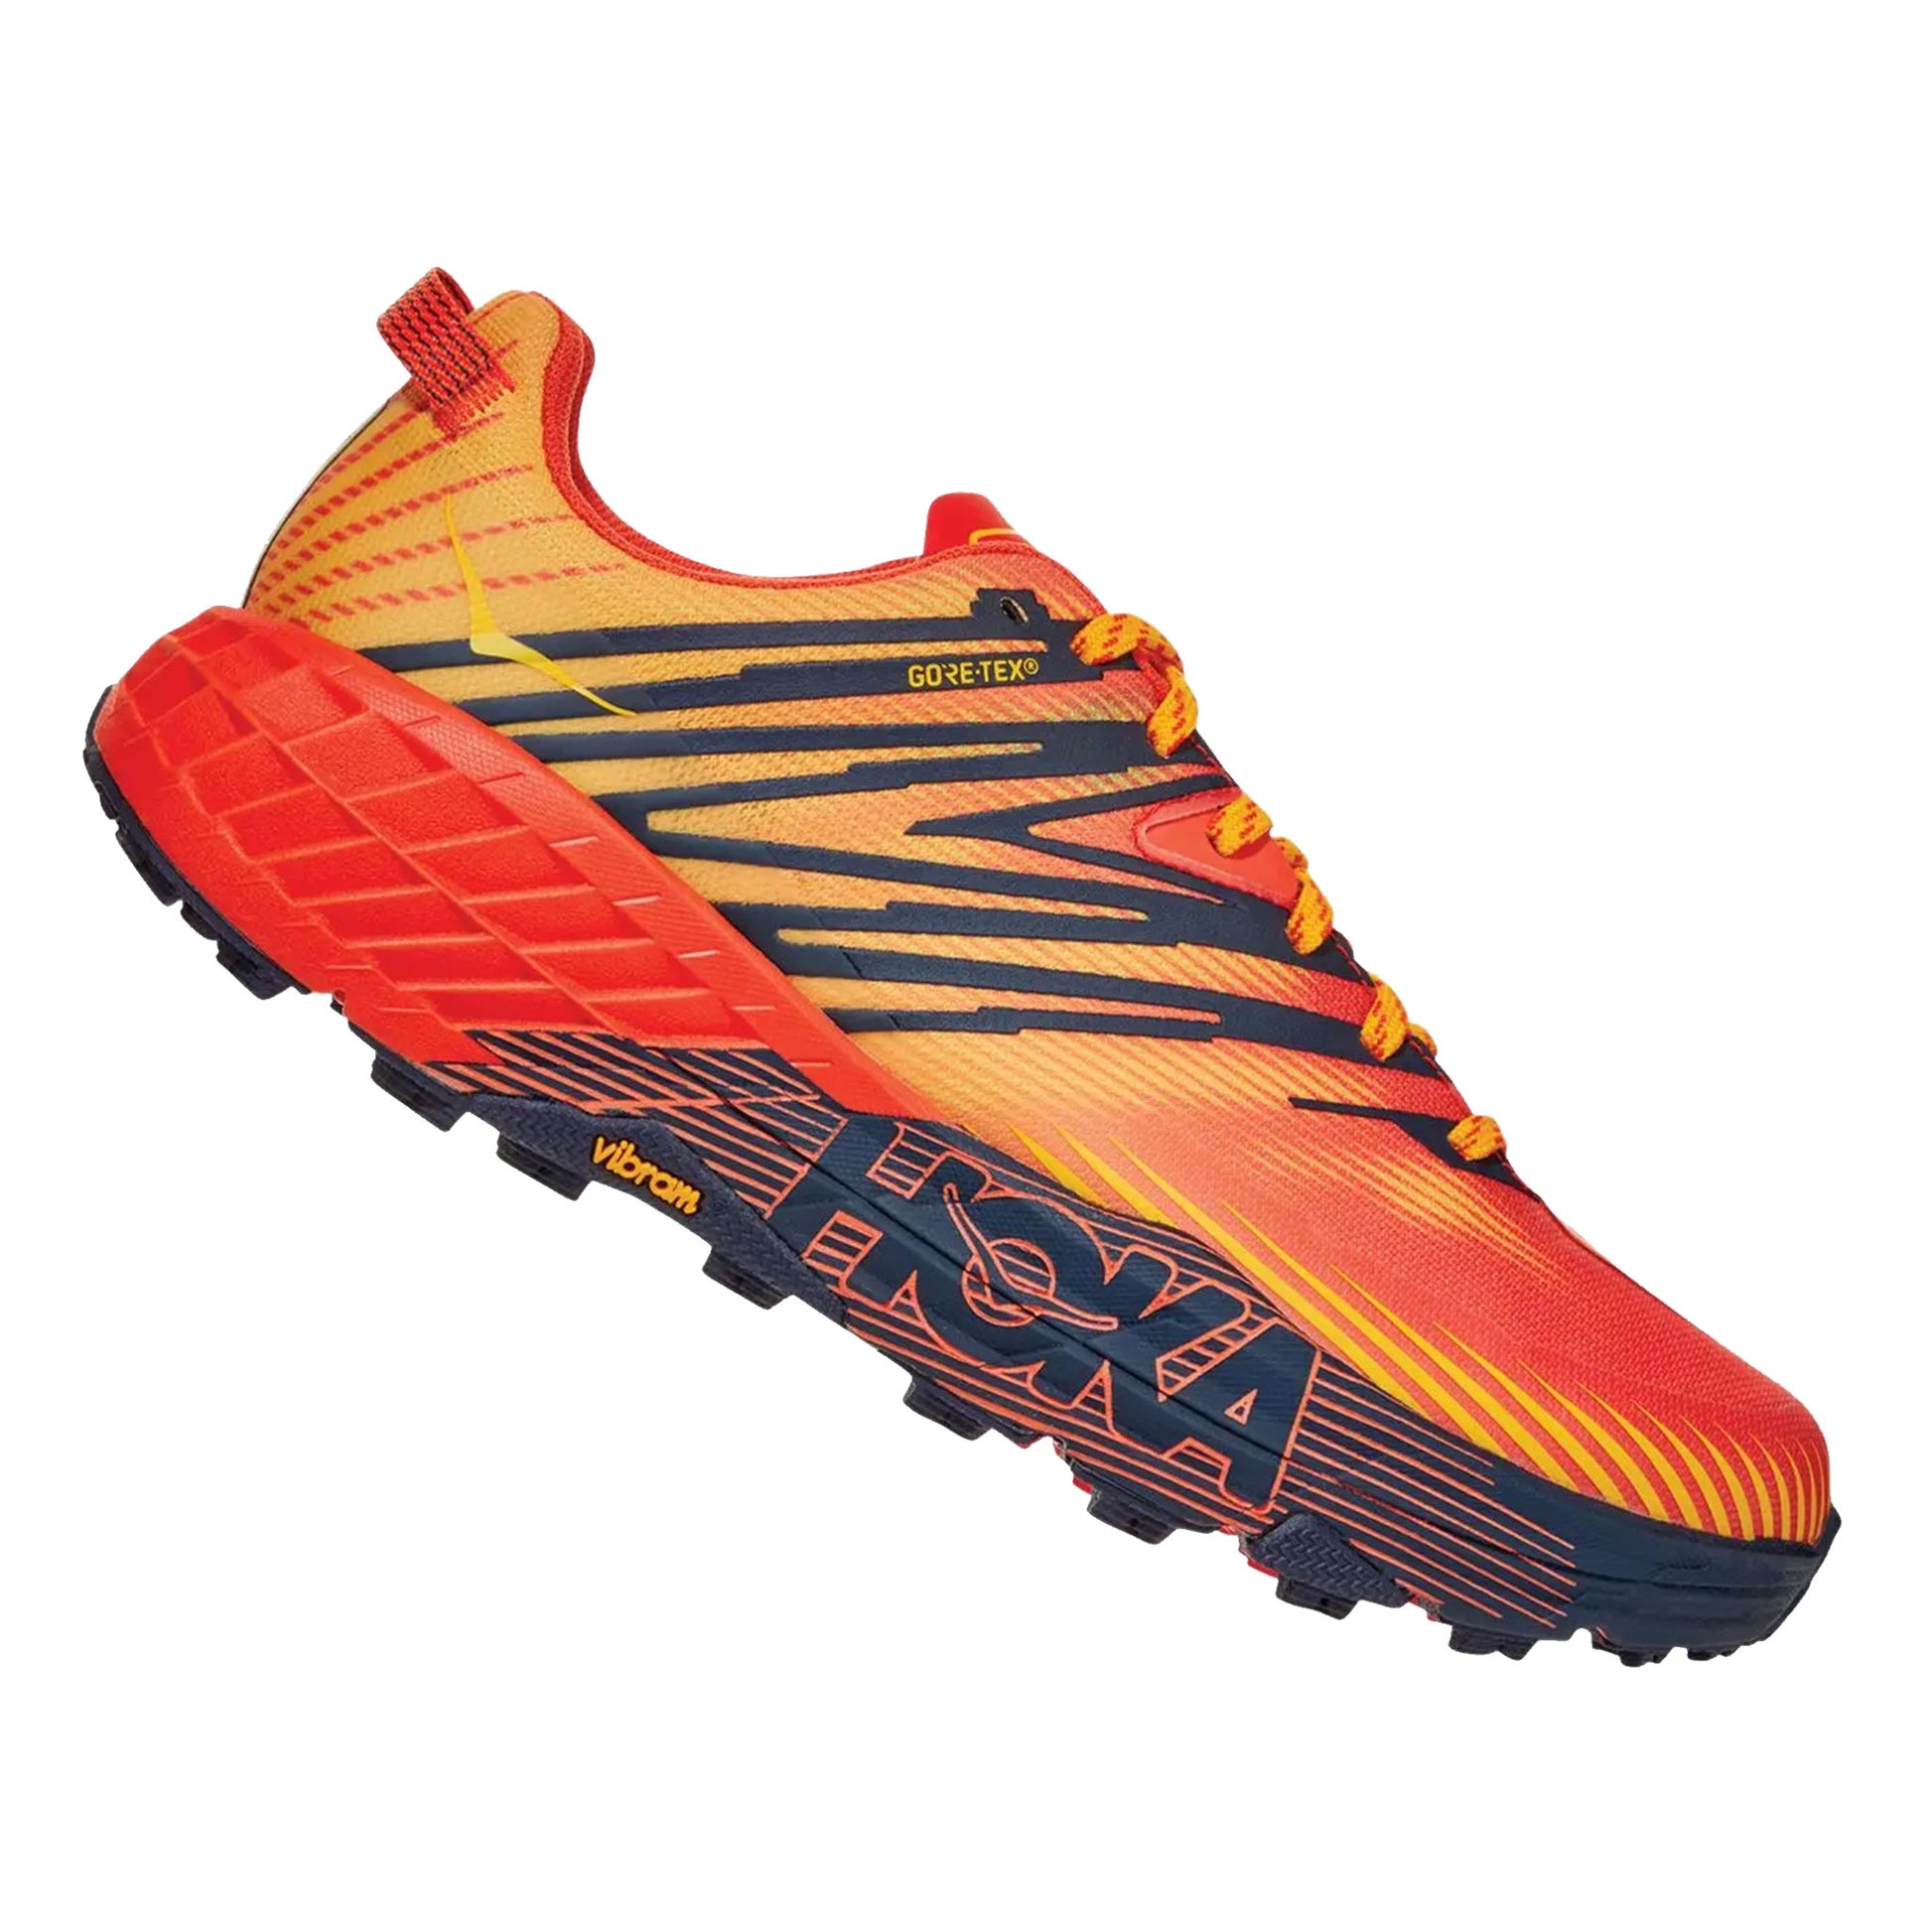 hoka one one shoes online Speedgoat 4 Gore-Tex Mandarin Red Gold Fusion sneakers runners footwear